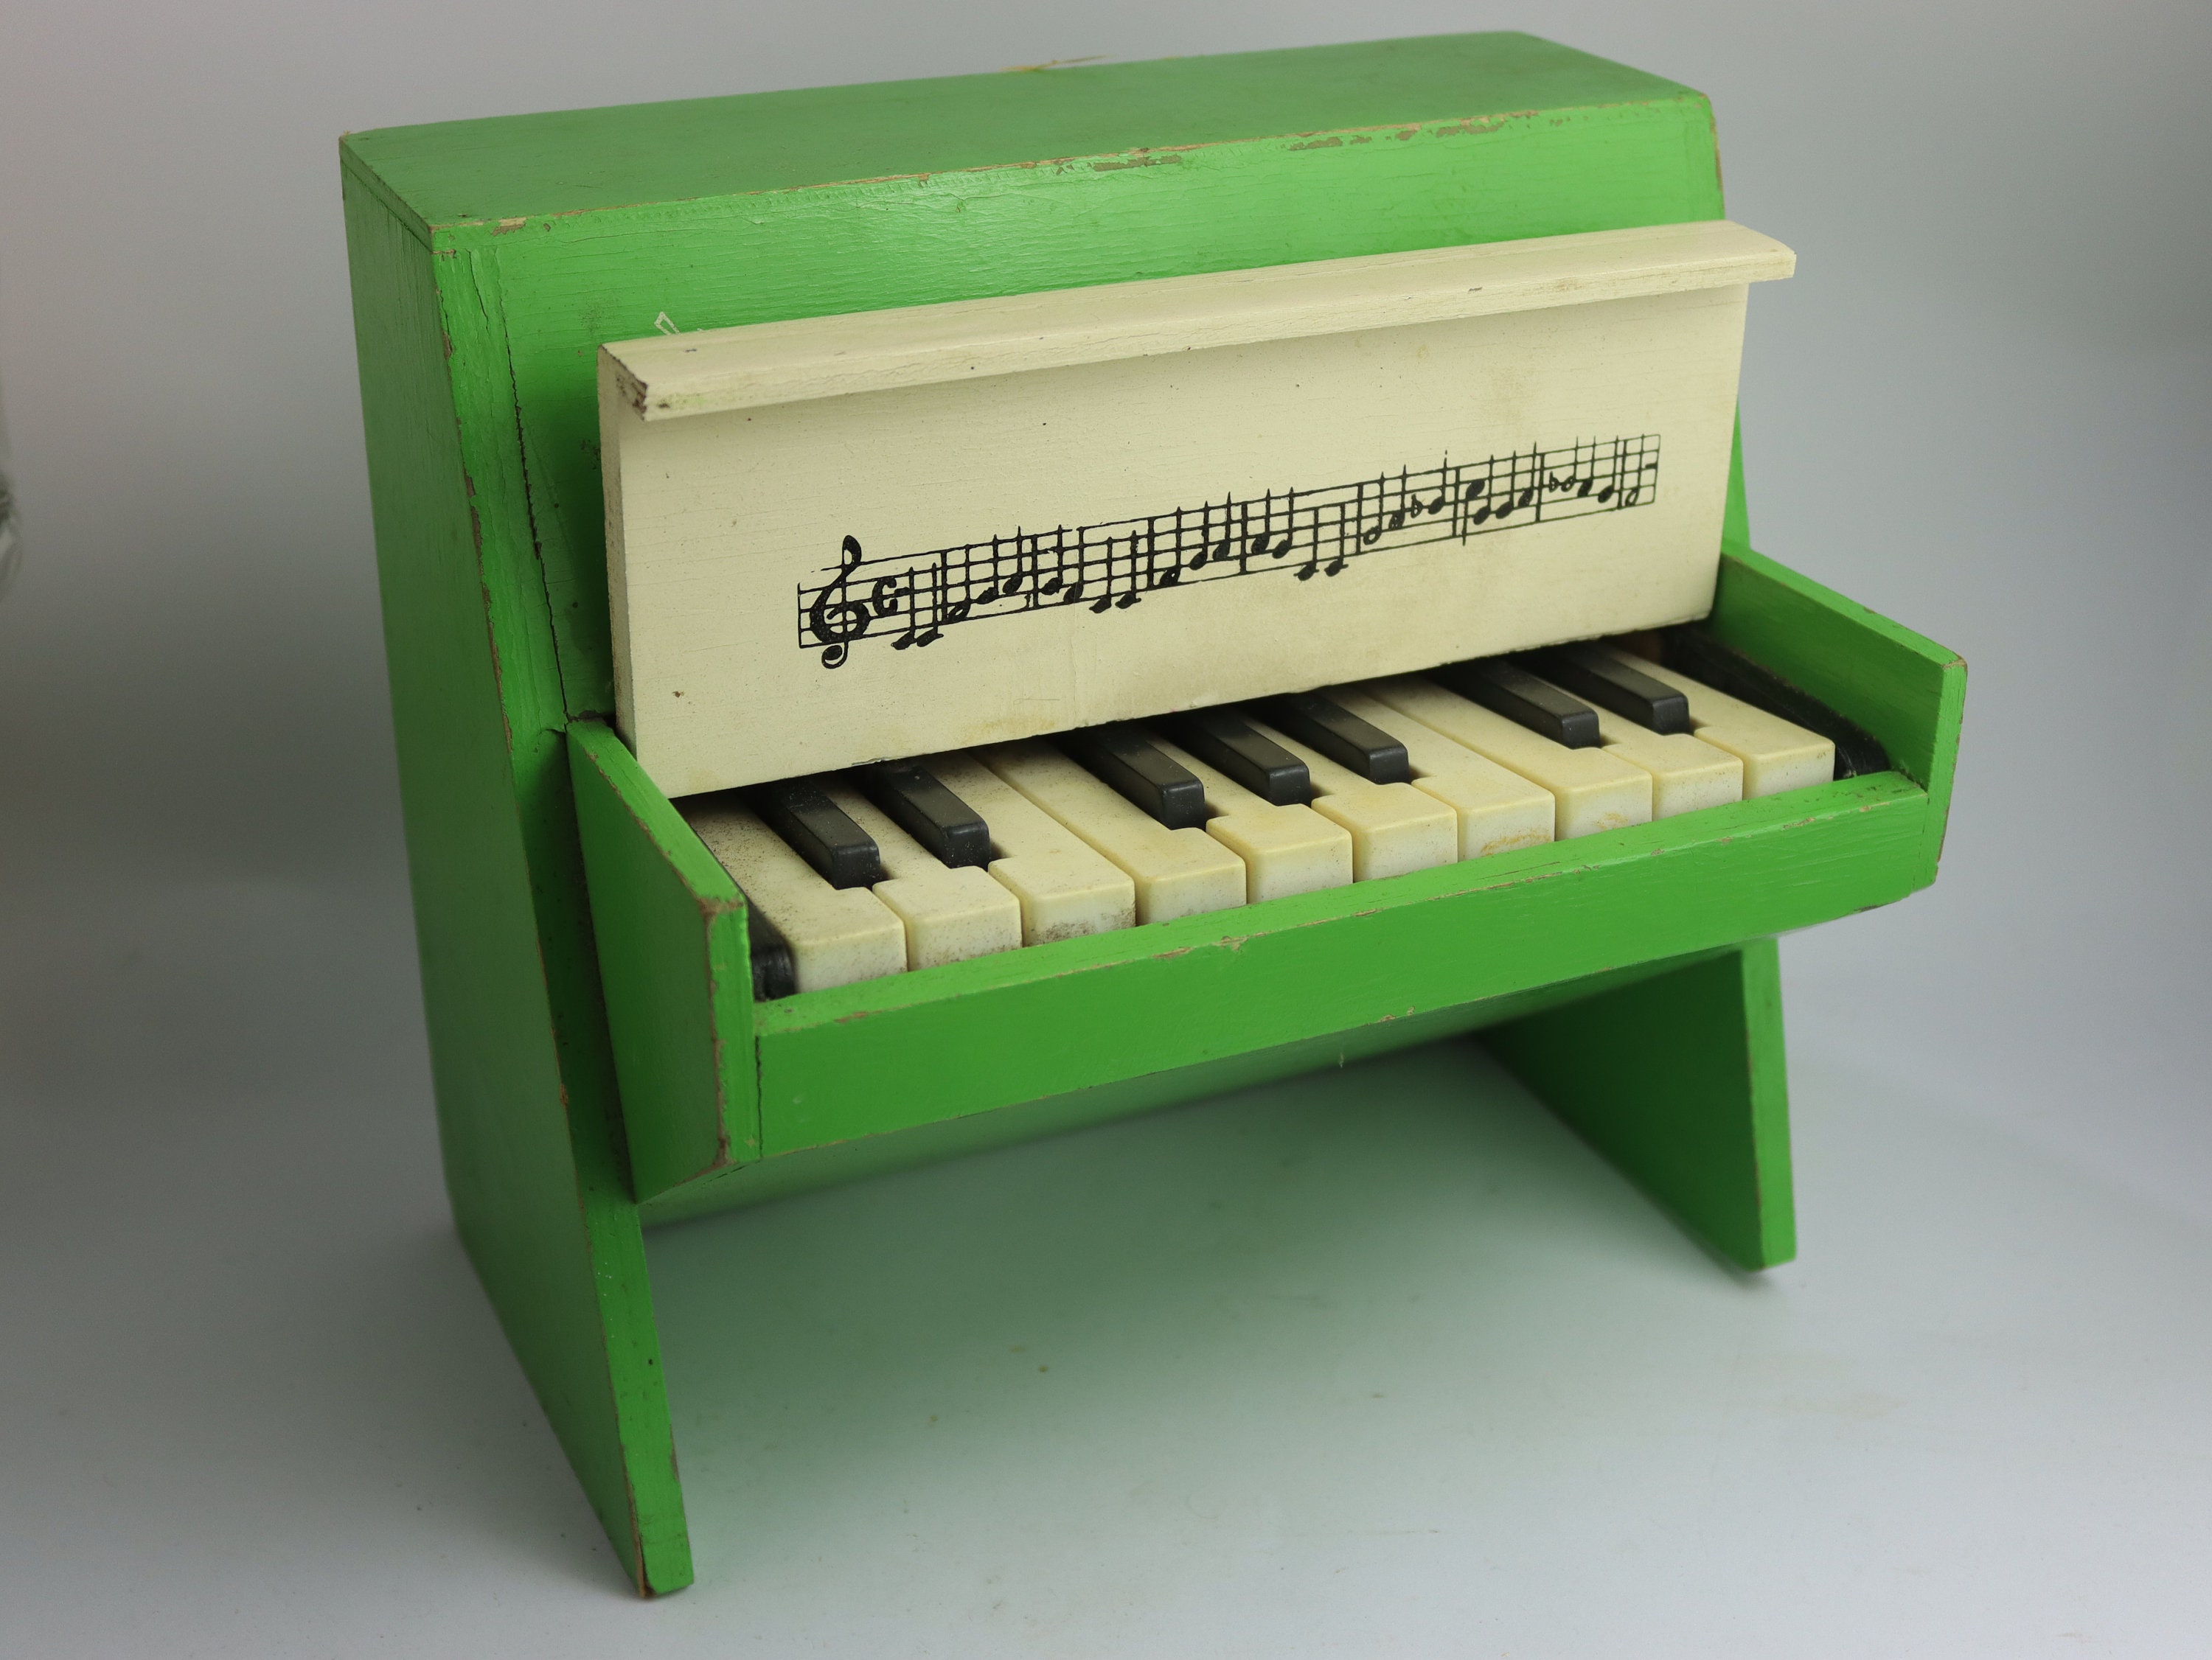 Soviet Piano Toy. Vintage Wooden Piano Toy With Defects. Grand Toy